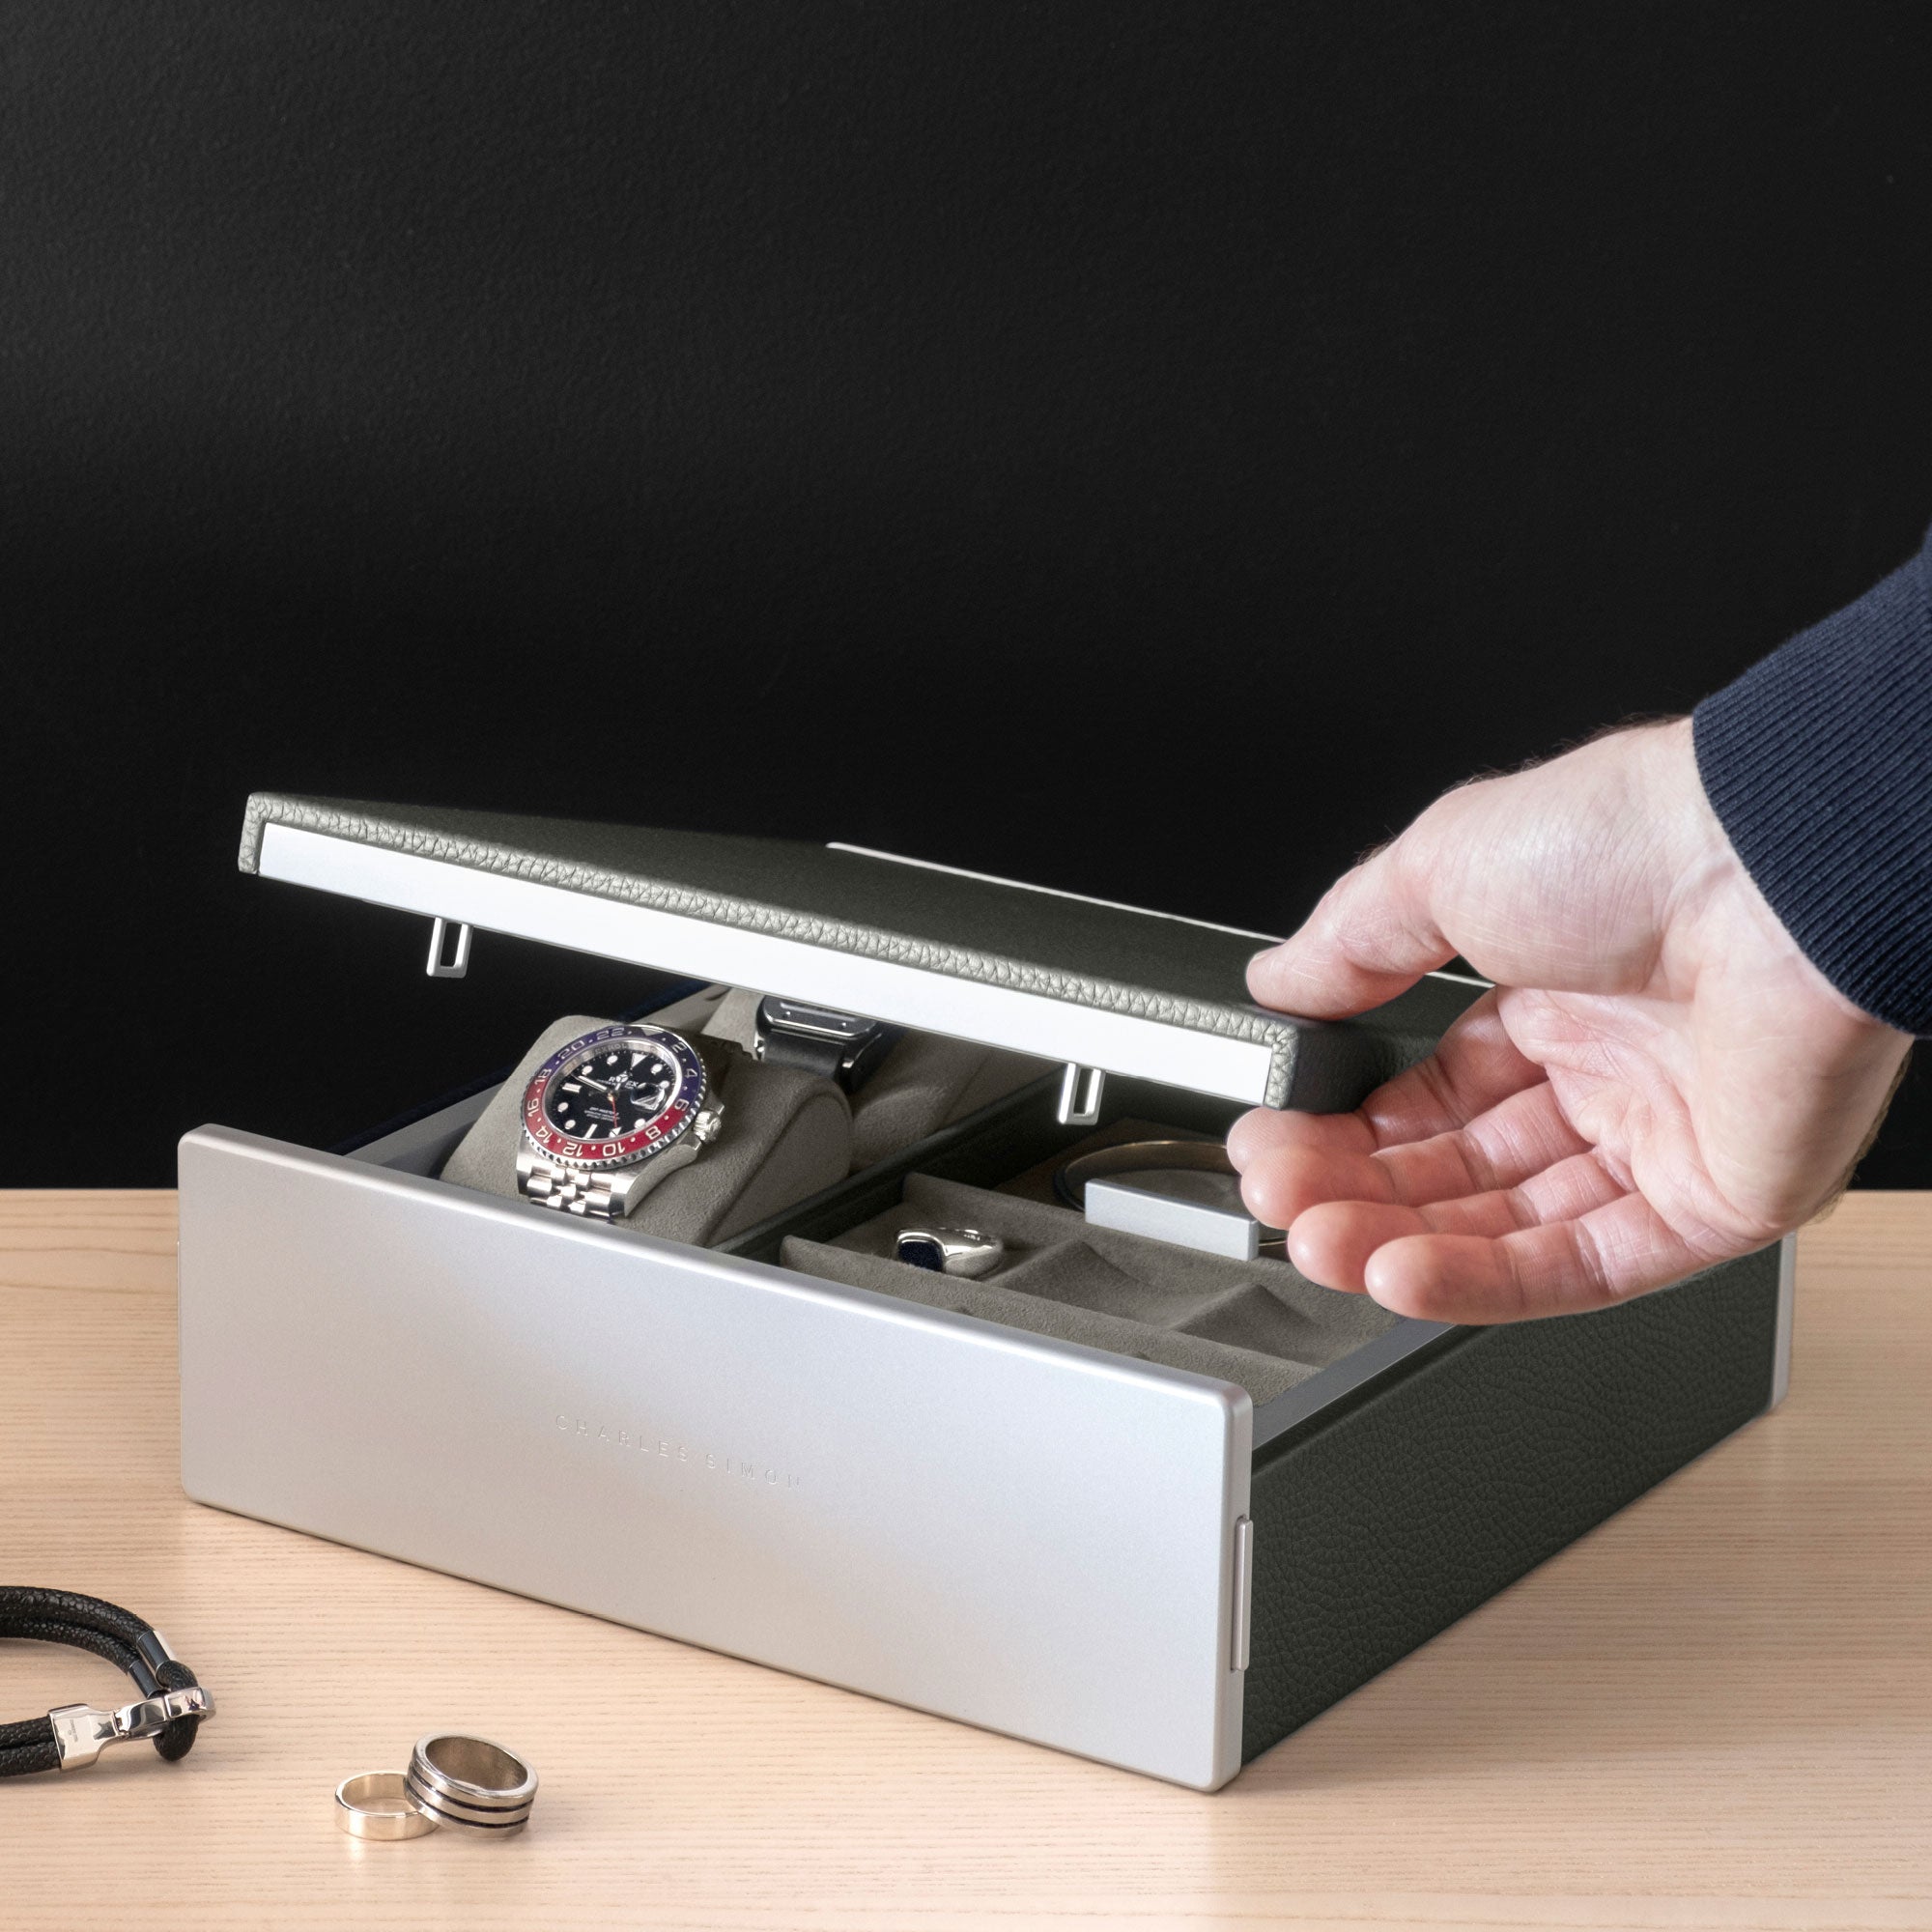 Man opening lid of the Taylor 2 Watch and Jewelry box in graphite leather and sea sand interior. The watch box and jewelry box is holding a Rolex on a watch cushion as well as silver jewelry